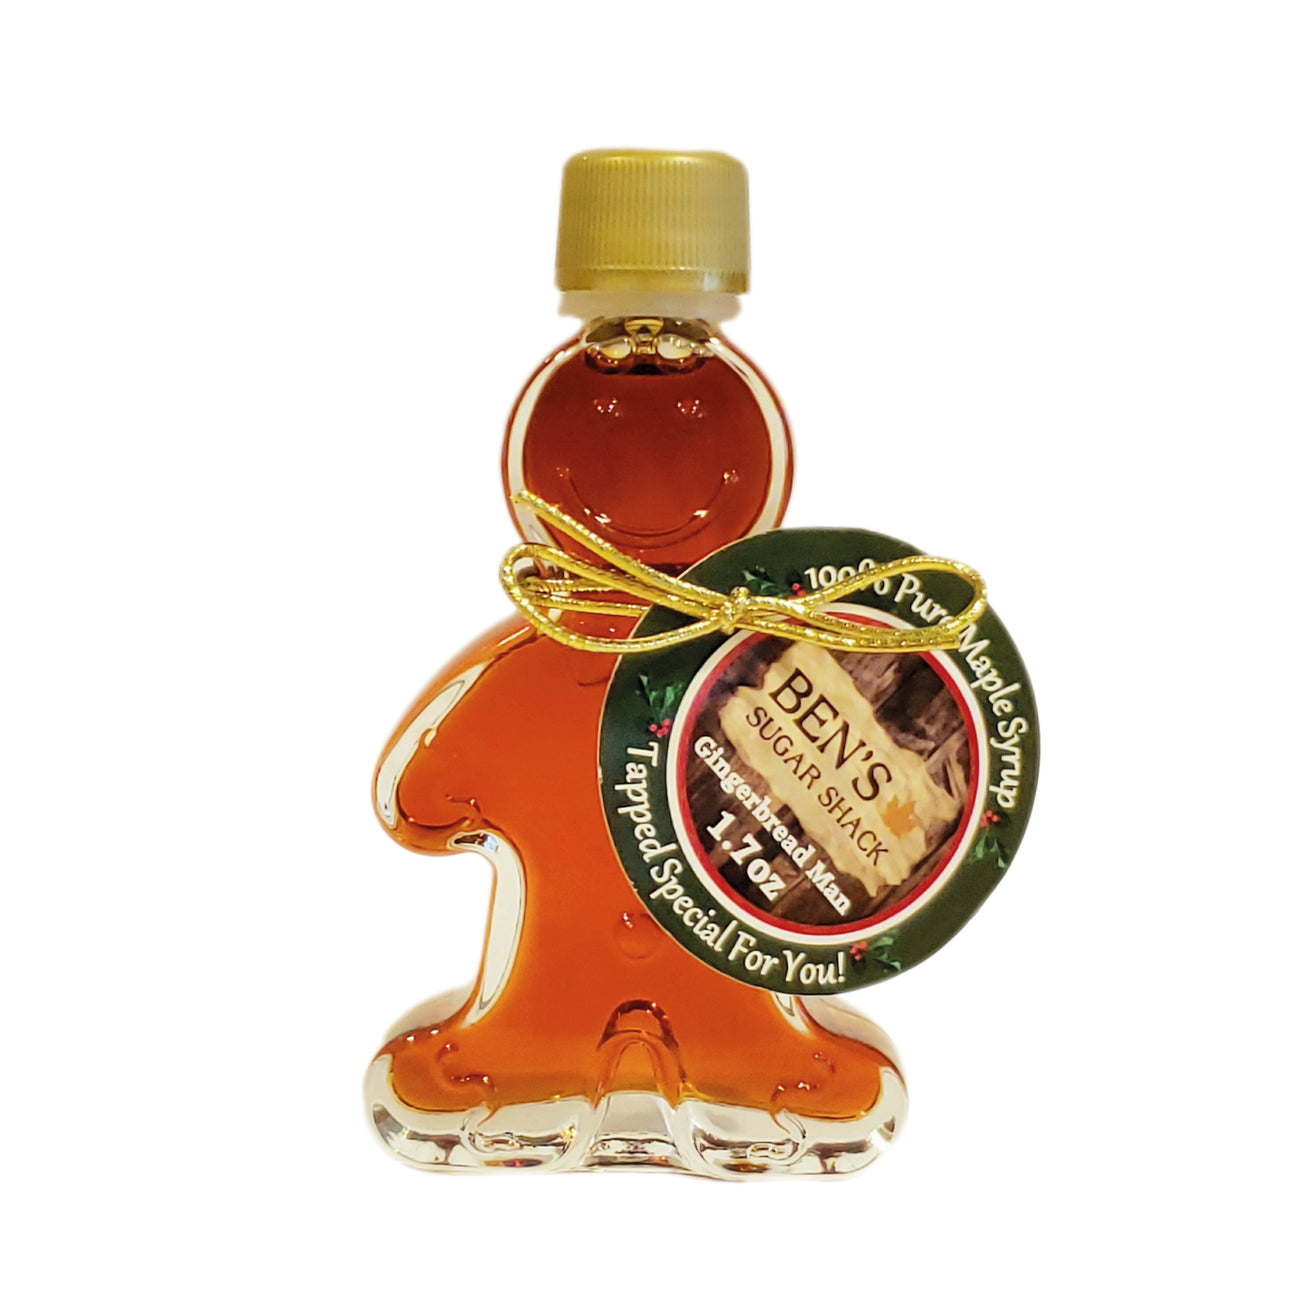 Pure Maple Syrup in Gingerbread Man Glass Bottle Grade A Dark / 1.7oz